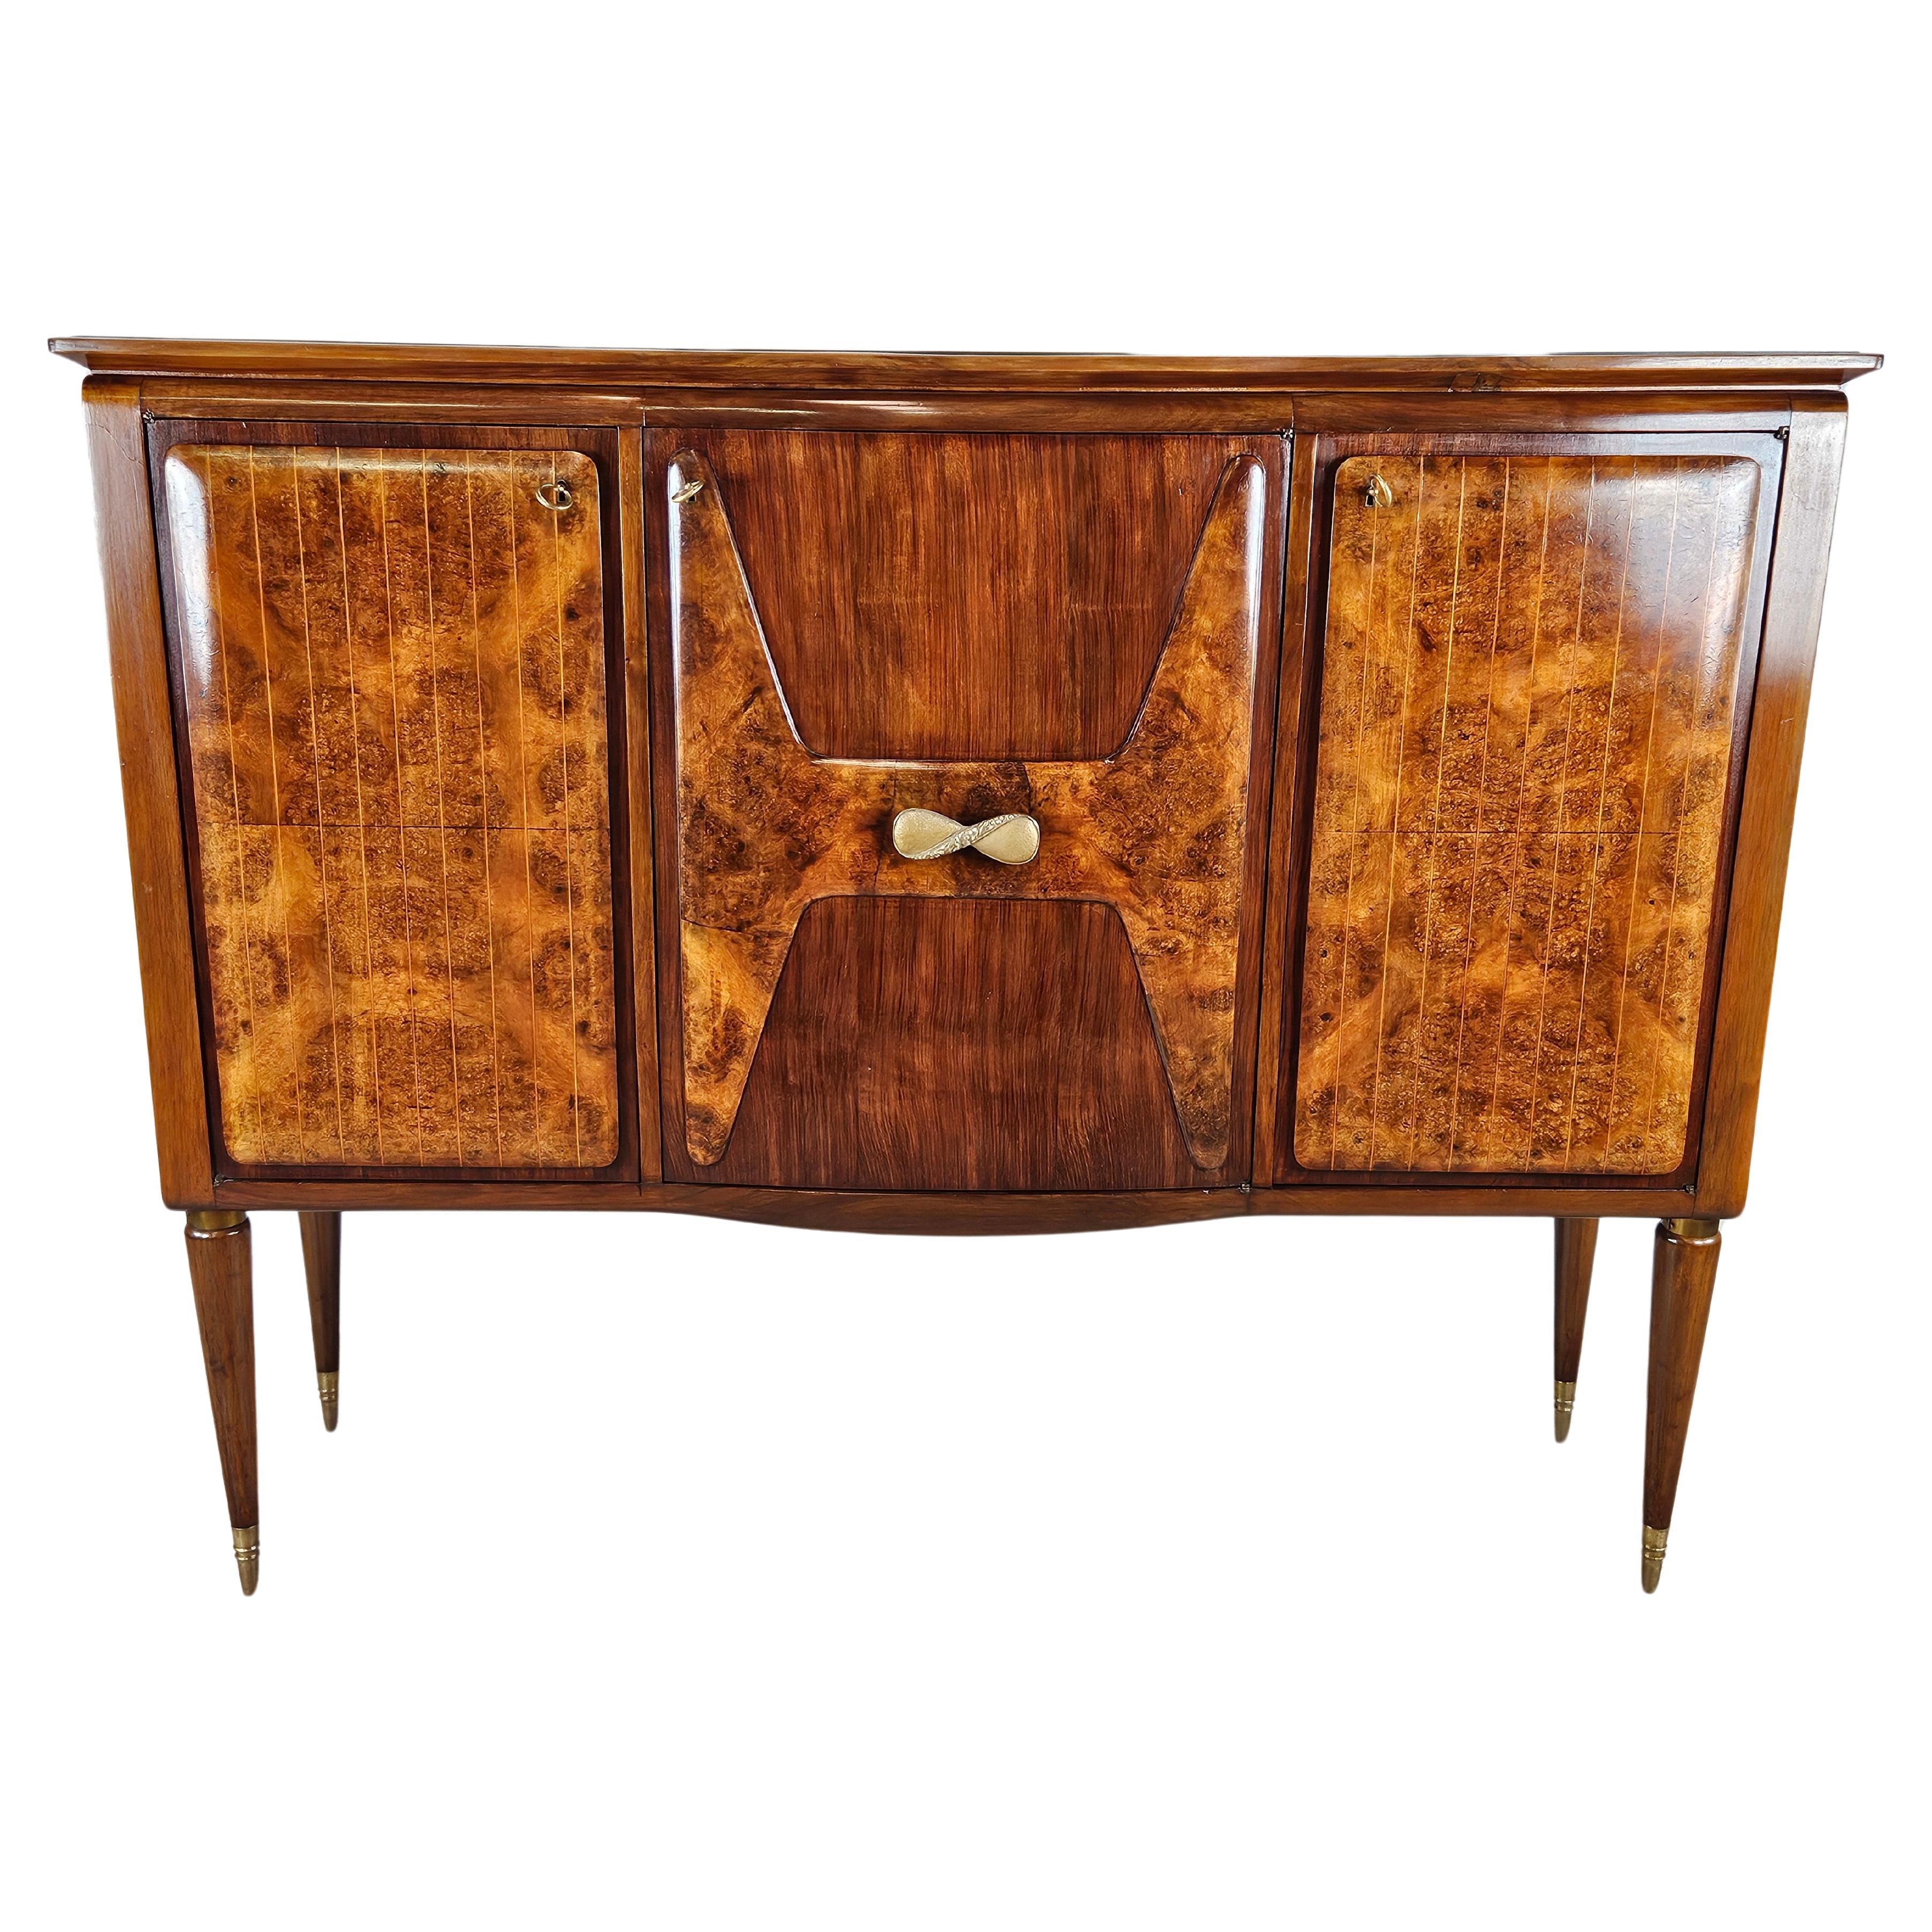 1940s-1950s walnut and maple sideboard with lighted compartment For Sale